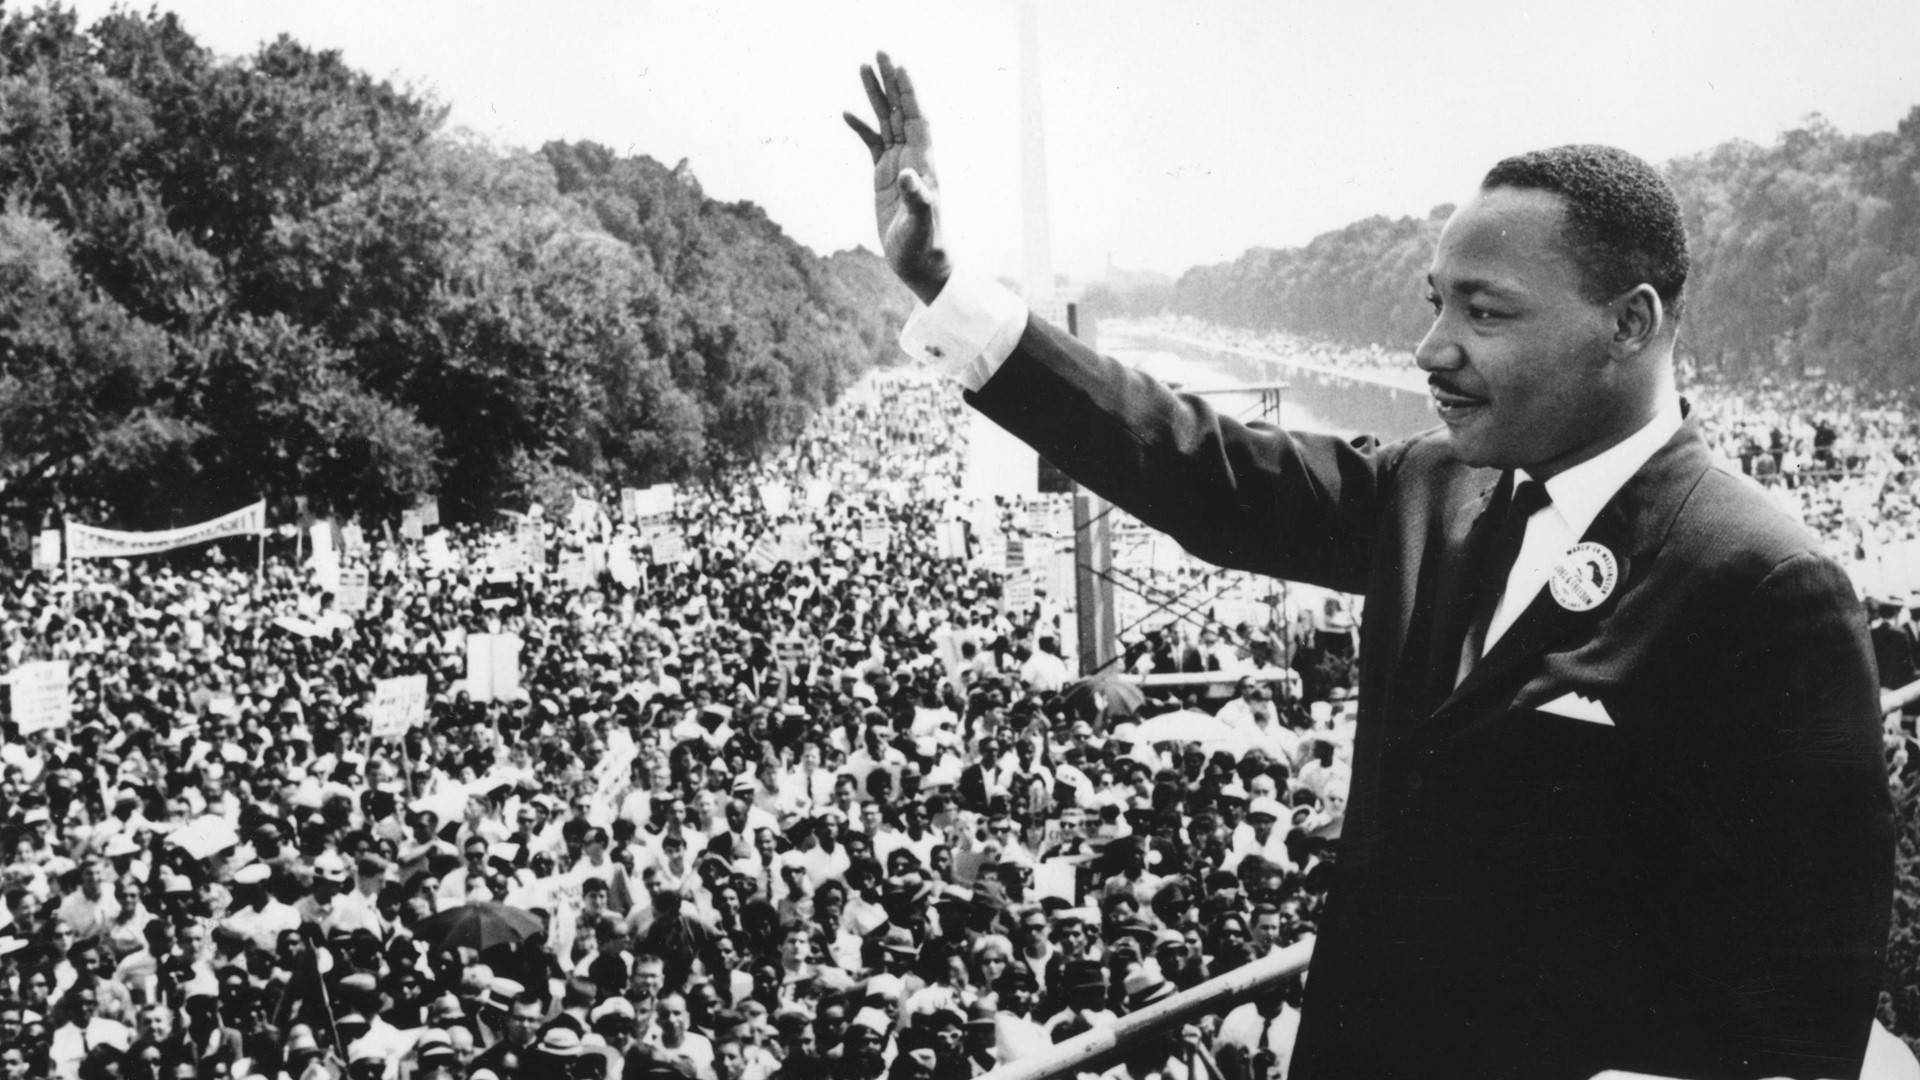 Martin Luther King Jr Waving To Crowd Background